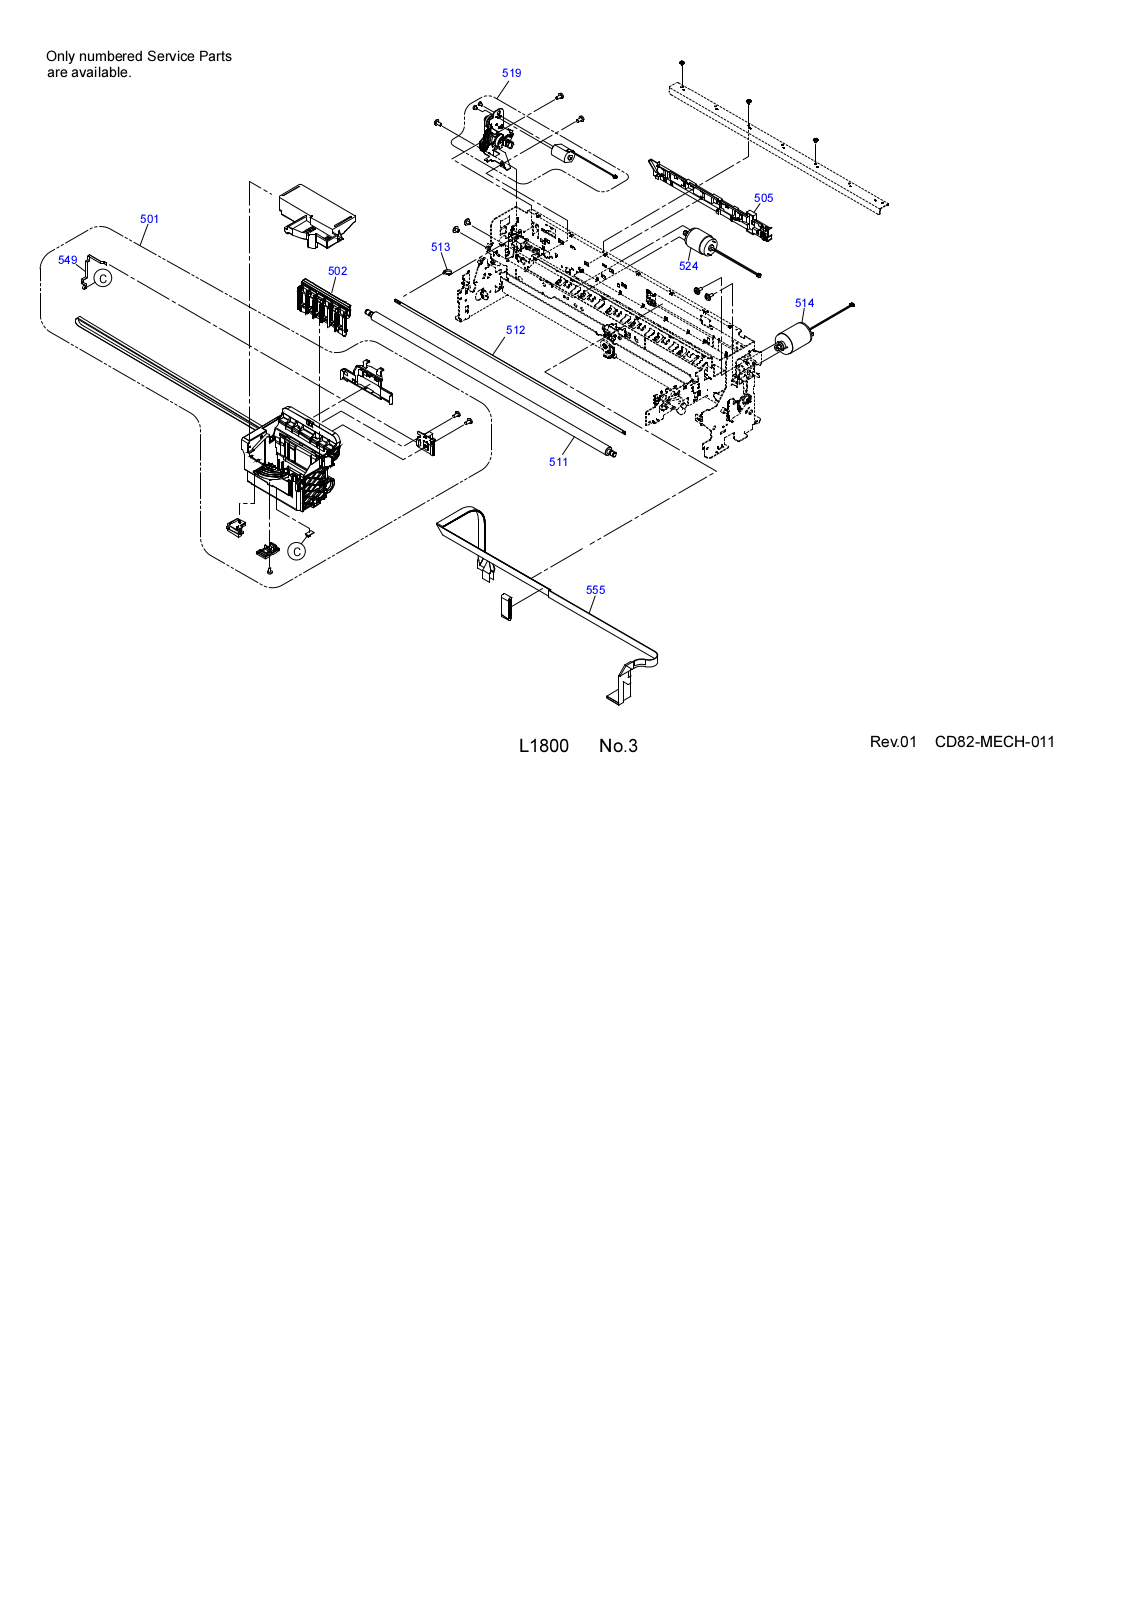 Epson L1800 Exploded Diagrams 3 7146